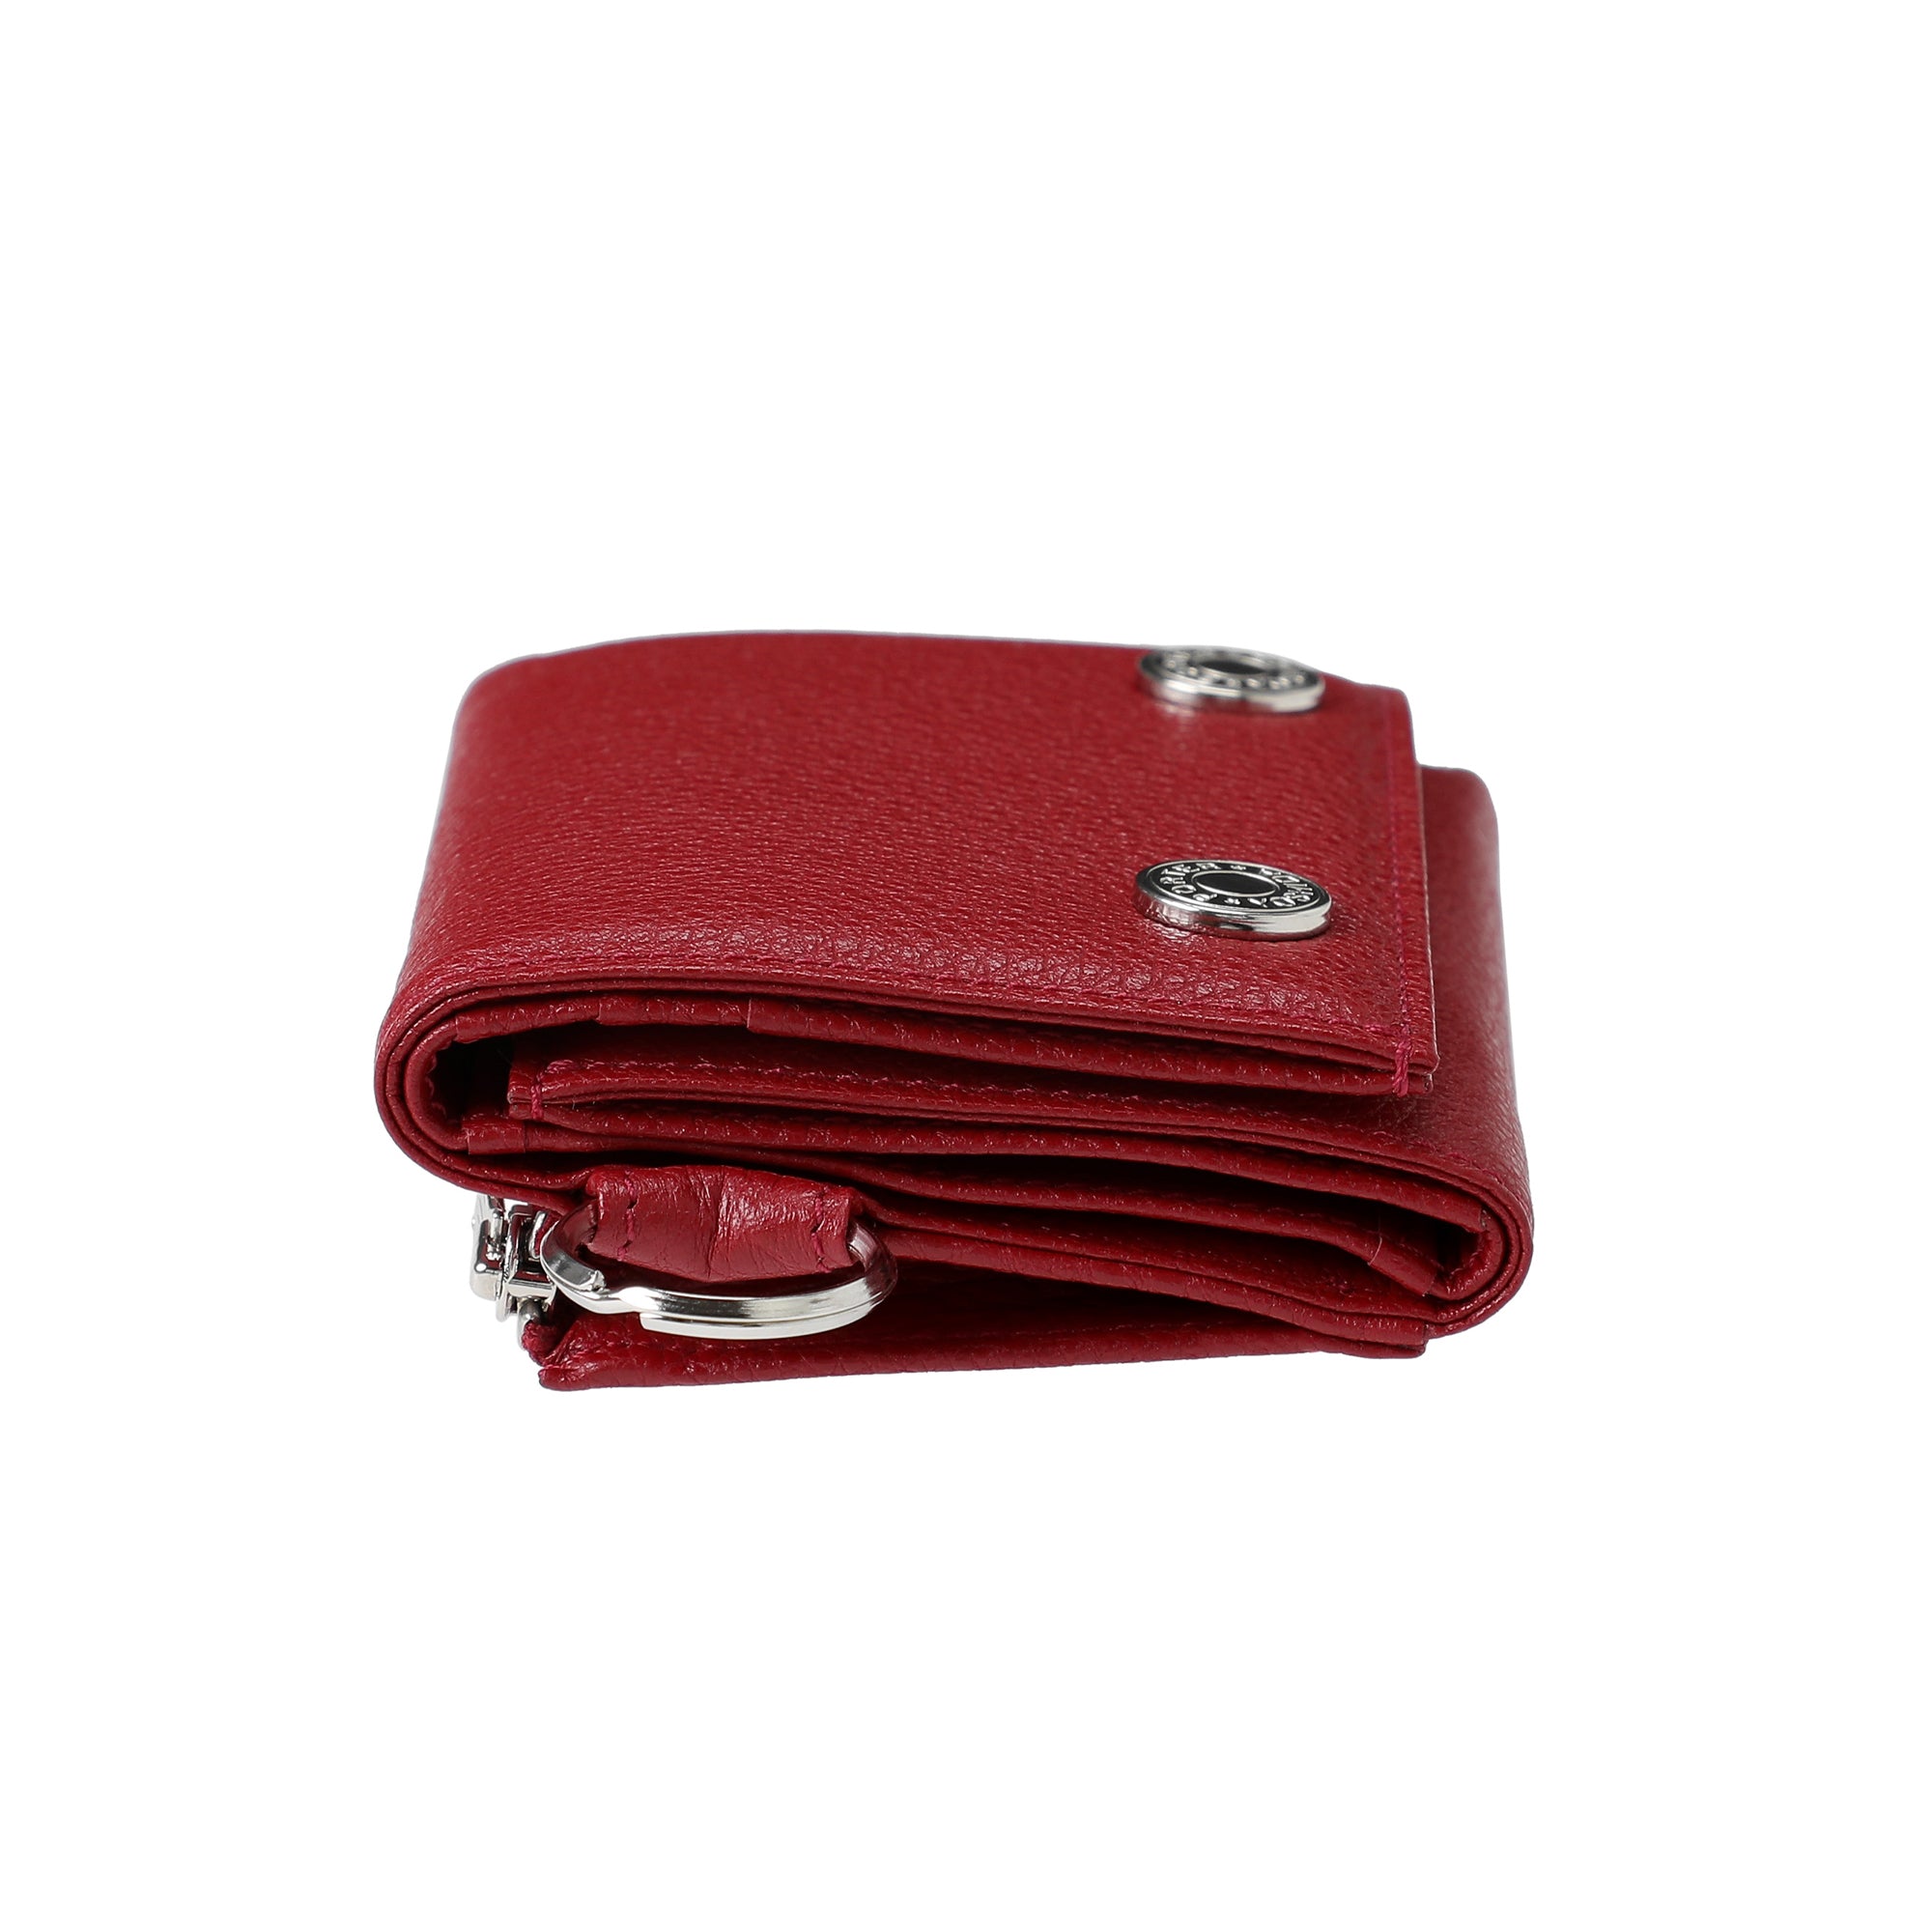 PORTER - Shrink Tri Purse - (Red) view 3